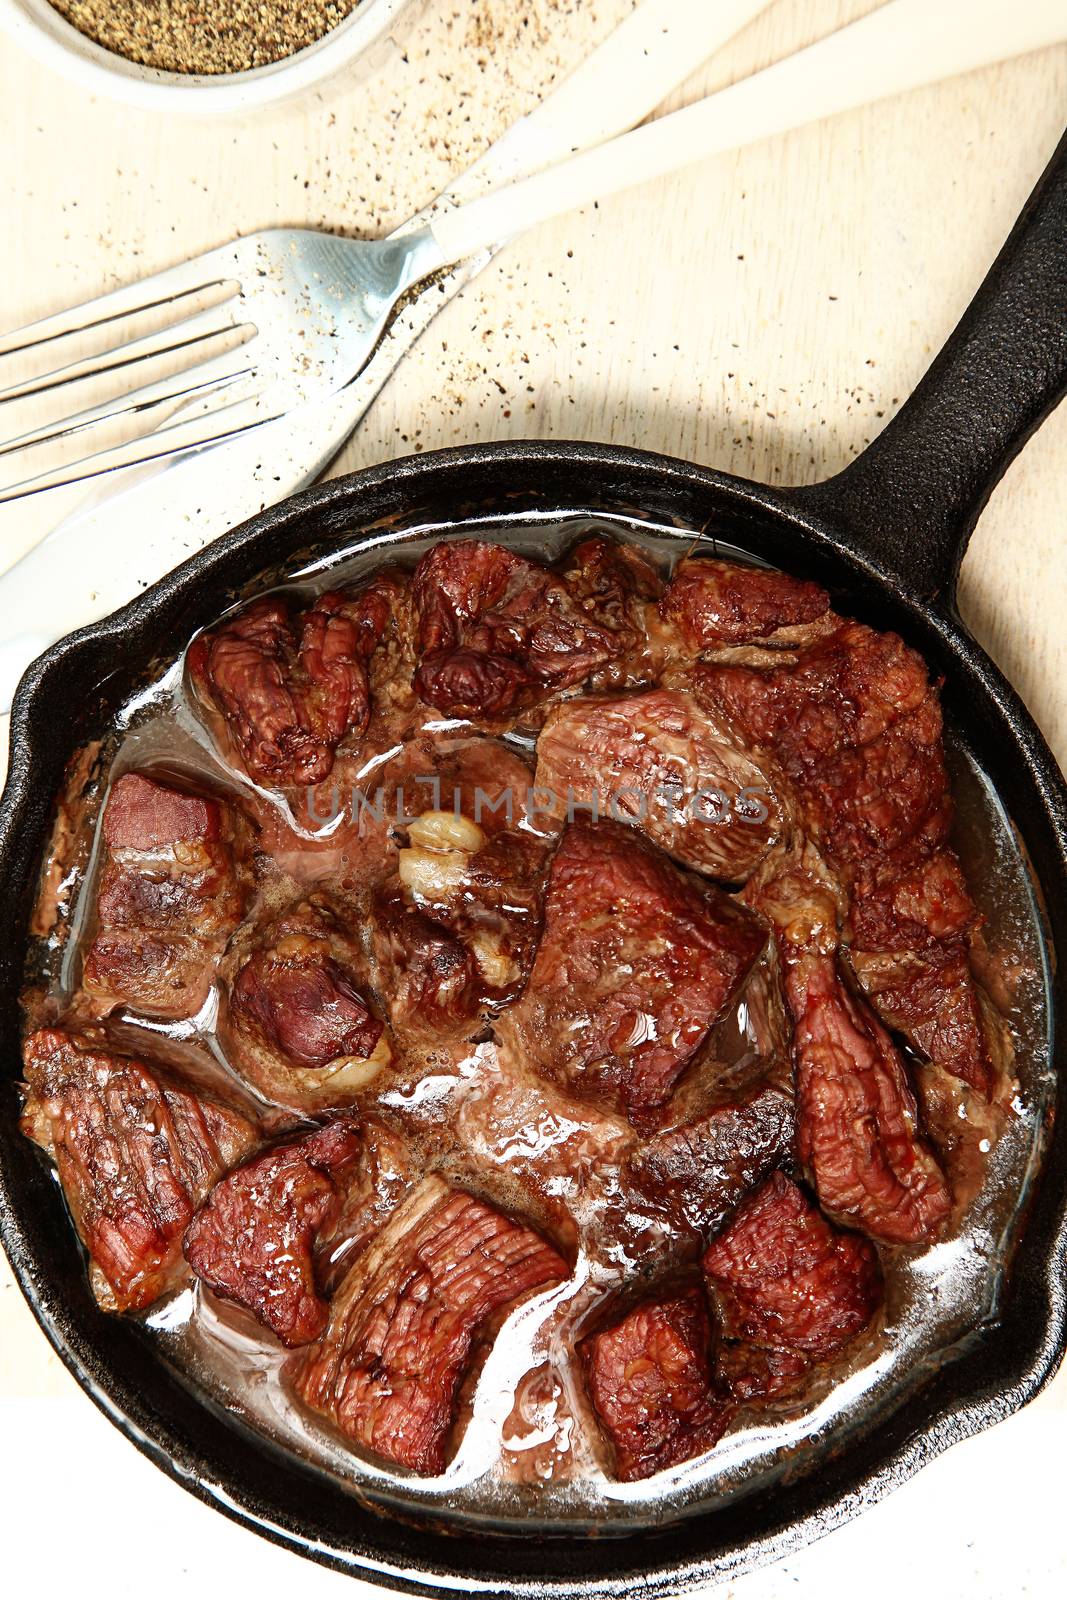 Oven Baked Beef Cubes in Cast Iron Skillet by duplass